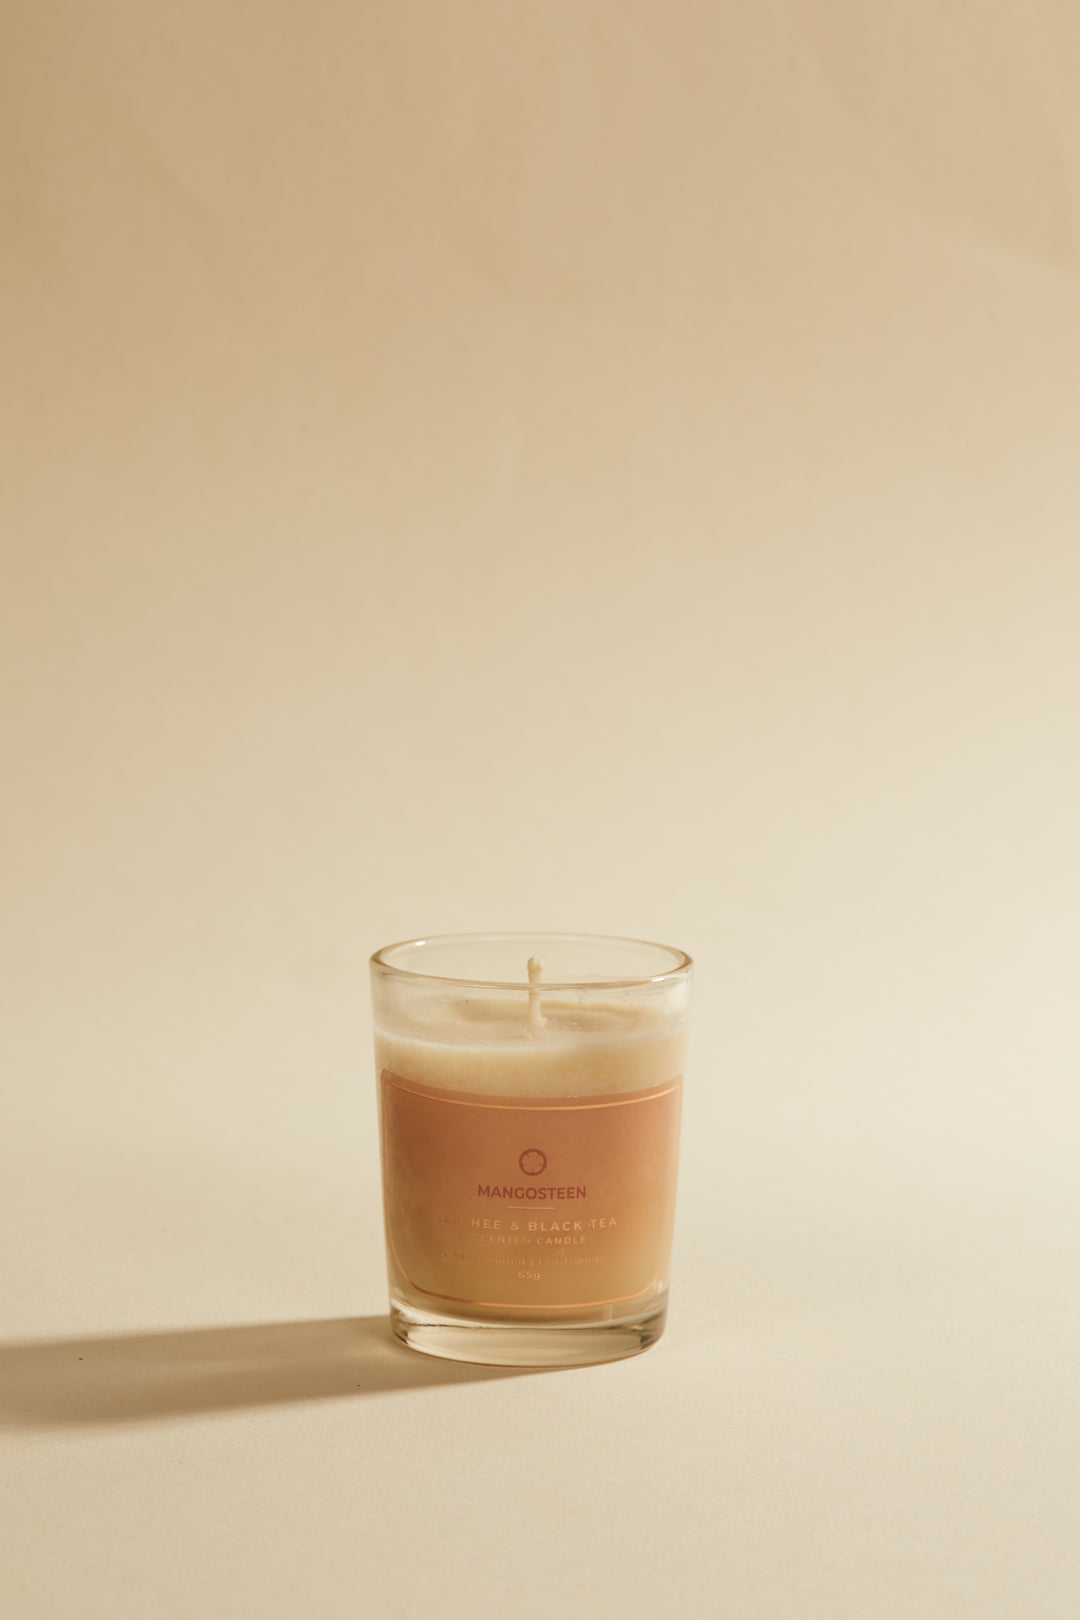 Lychee & Black Tea Soy Candle - 65g